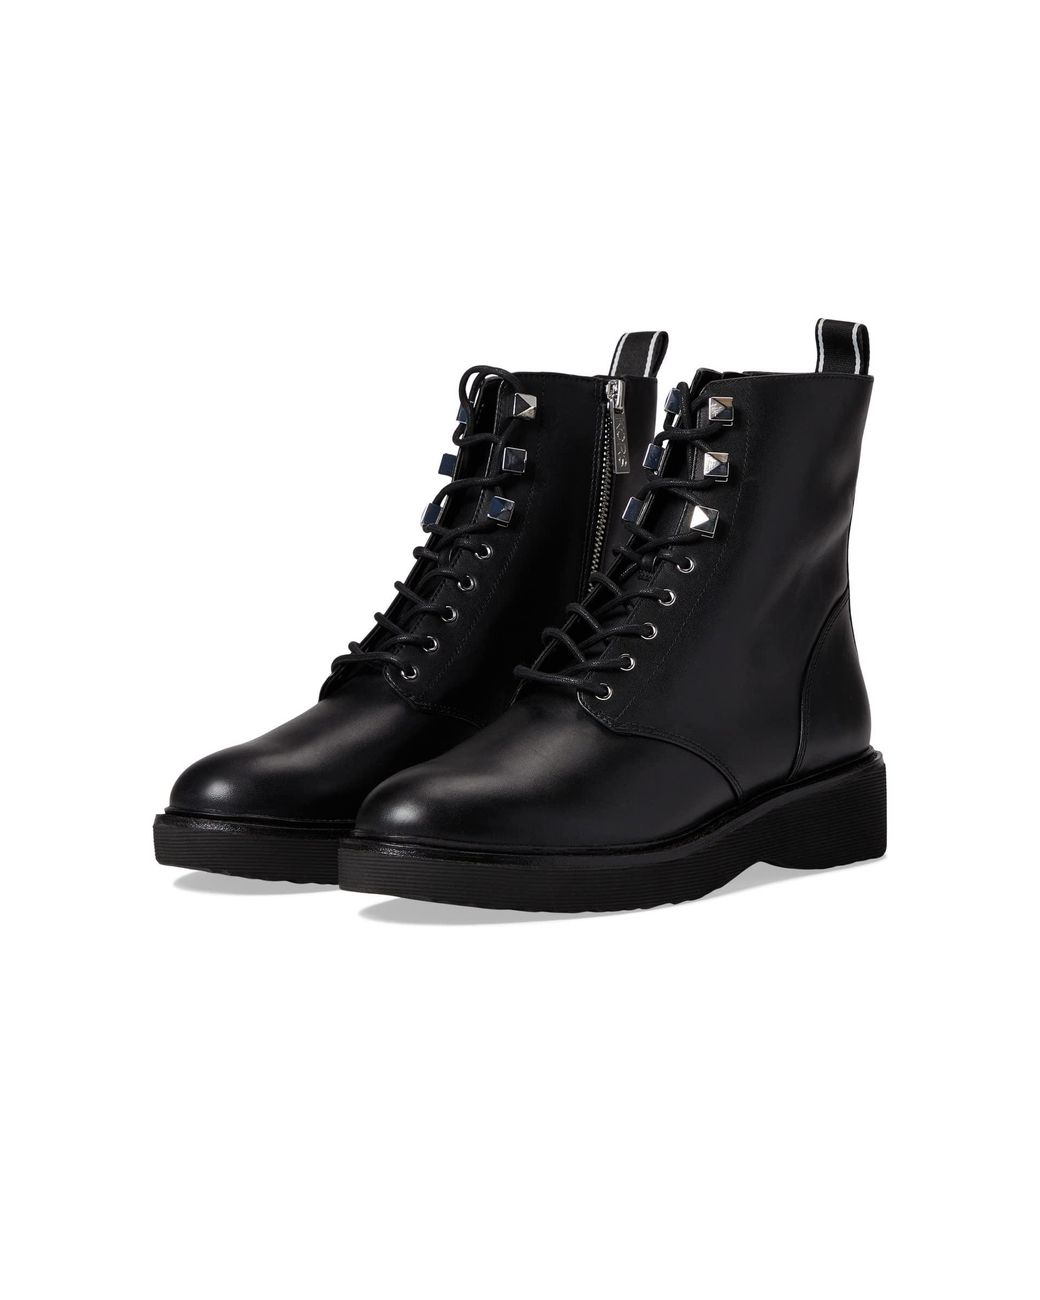 Michael Kors Haskell Patent Leather Combat Boot in Black | Lyst